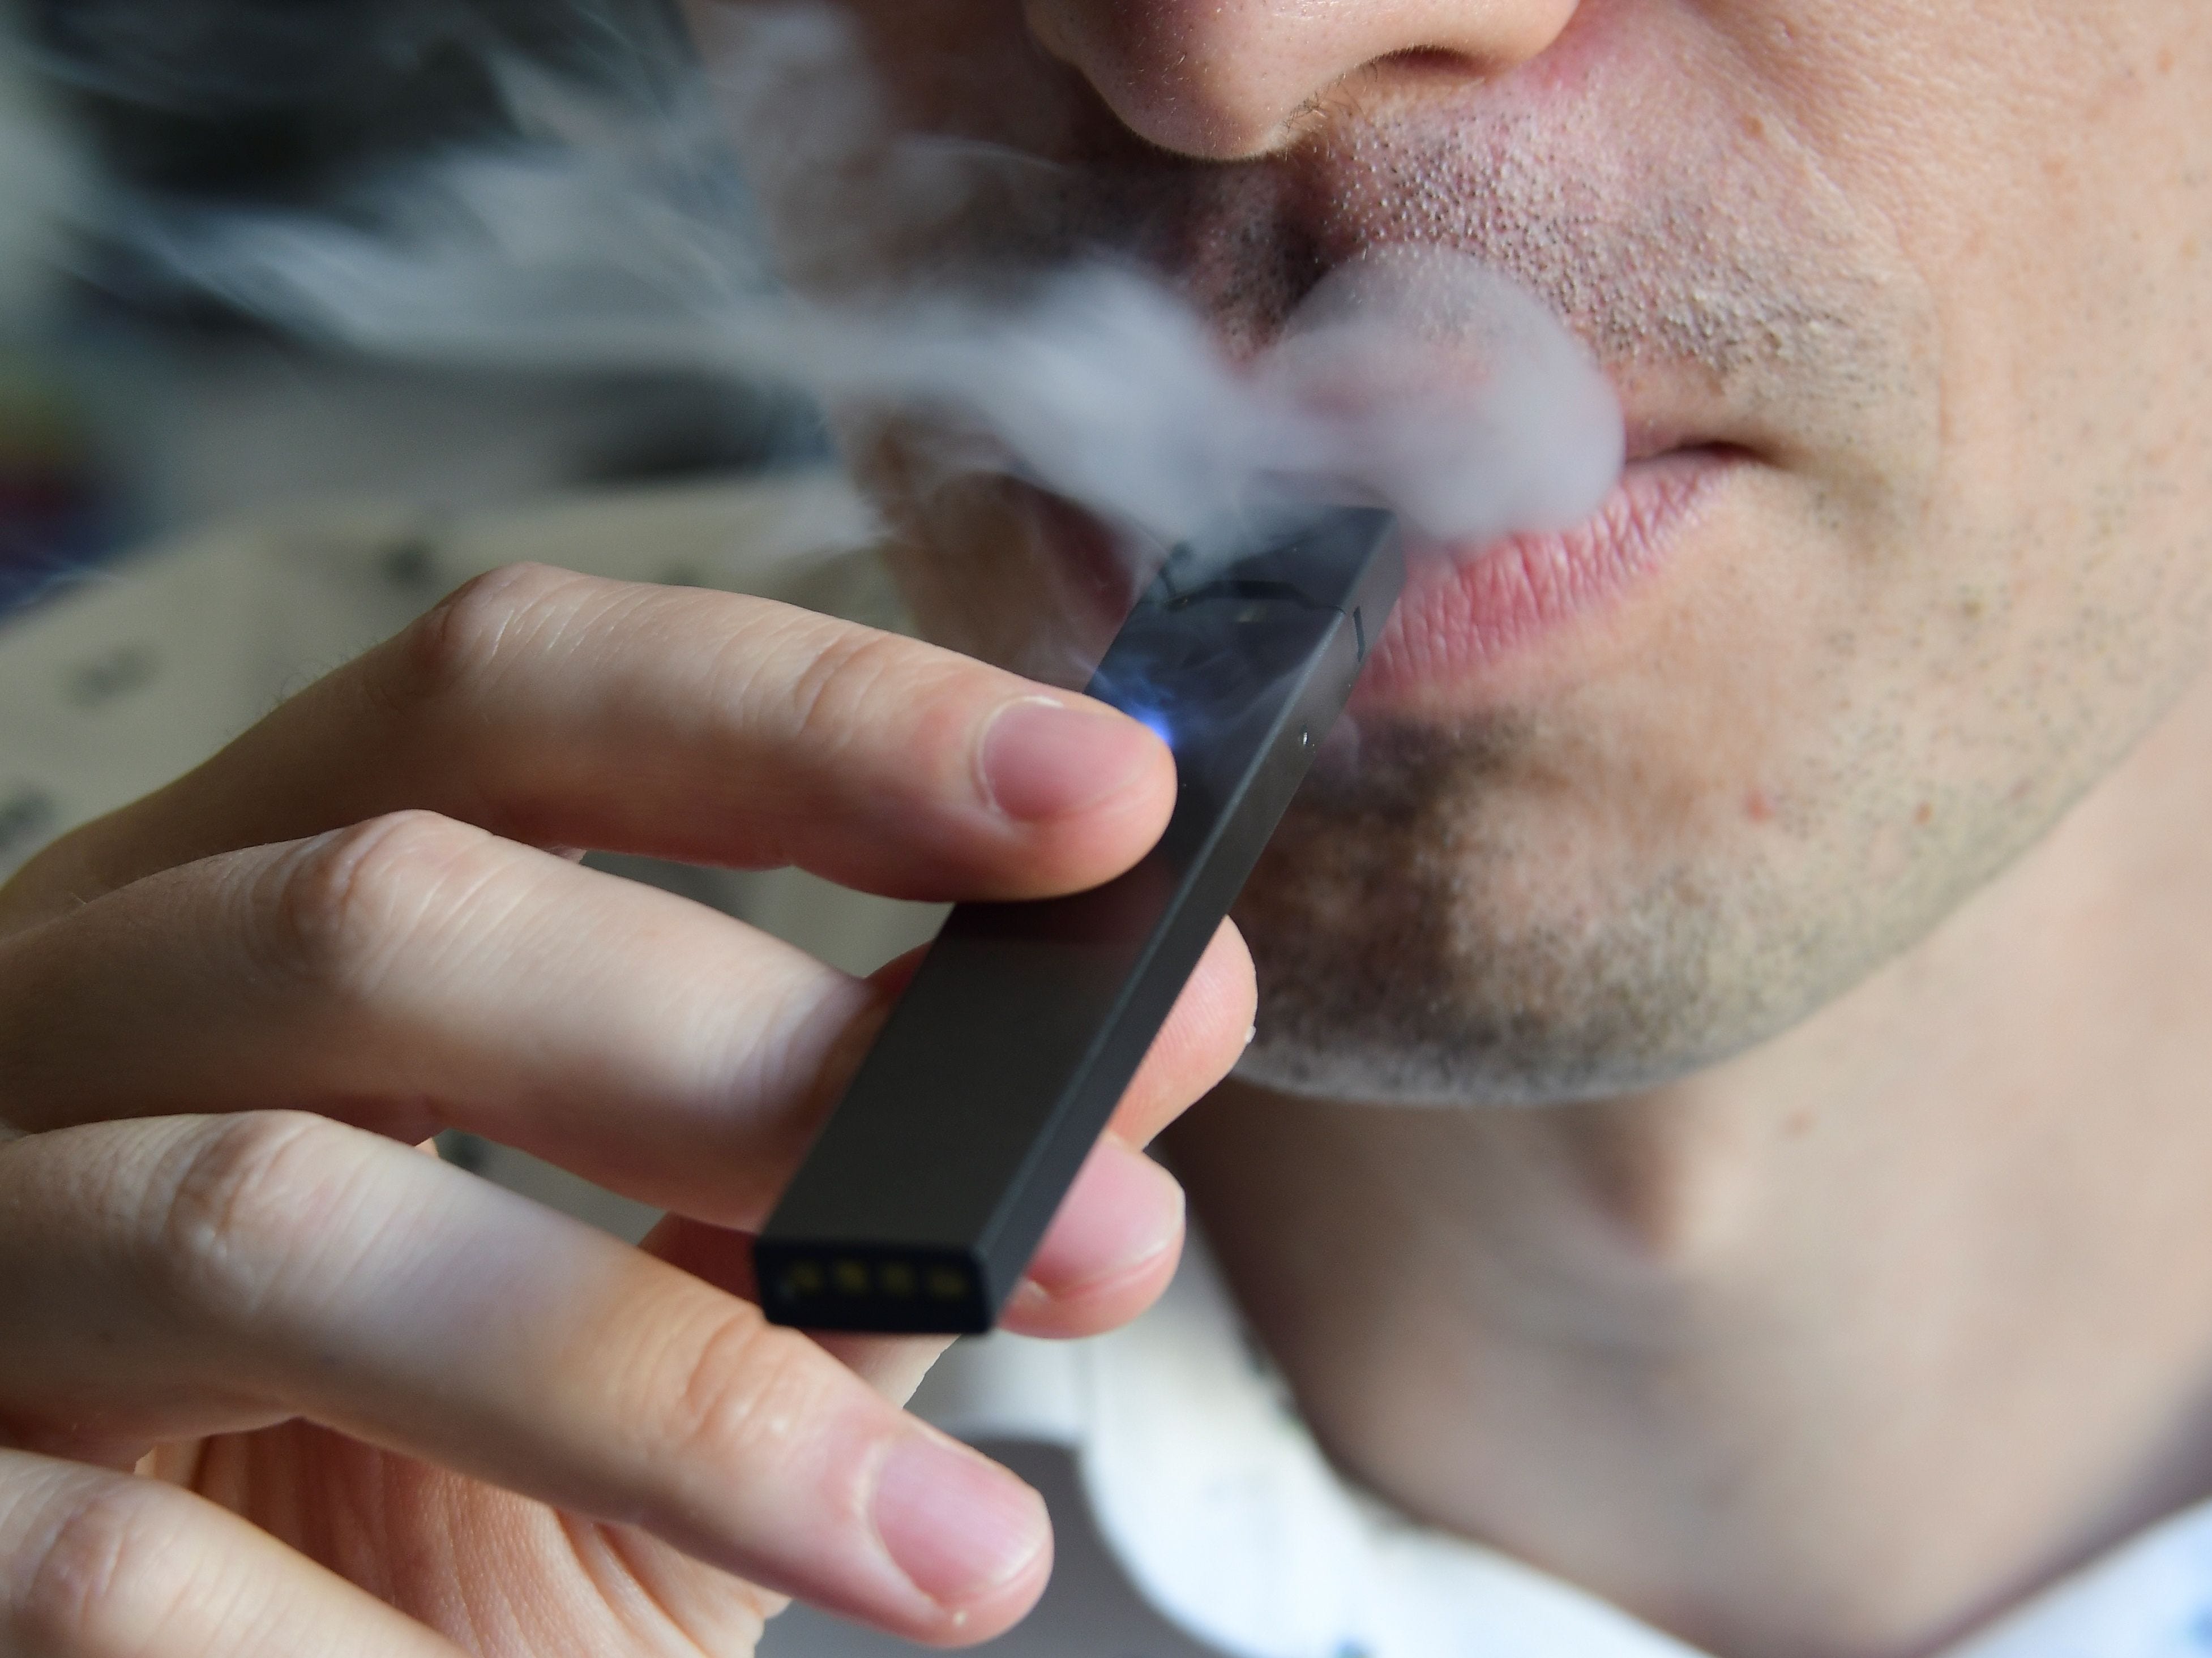 Walmart to stop selling e-cigarettes amid health worries over vaping